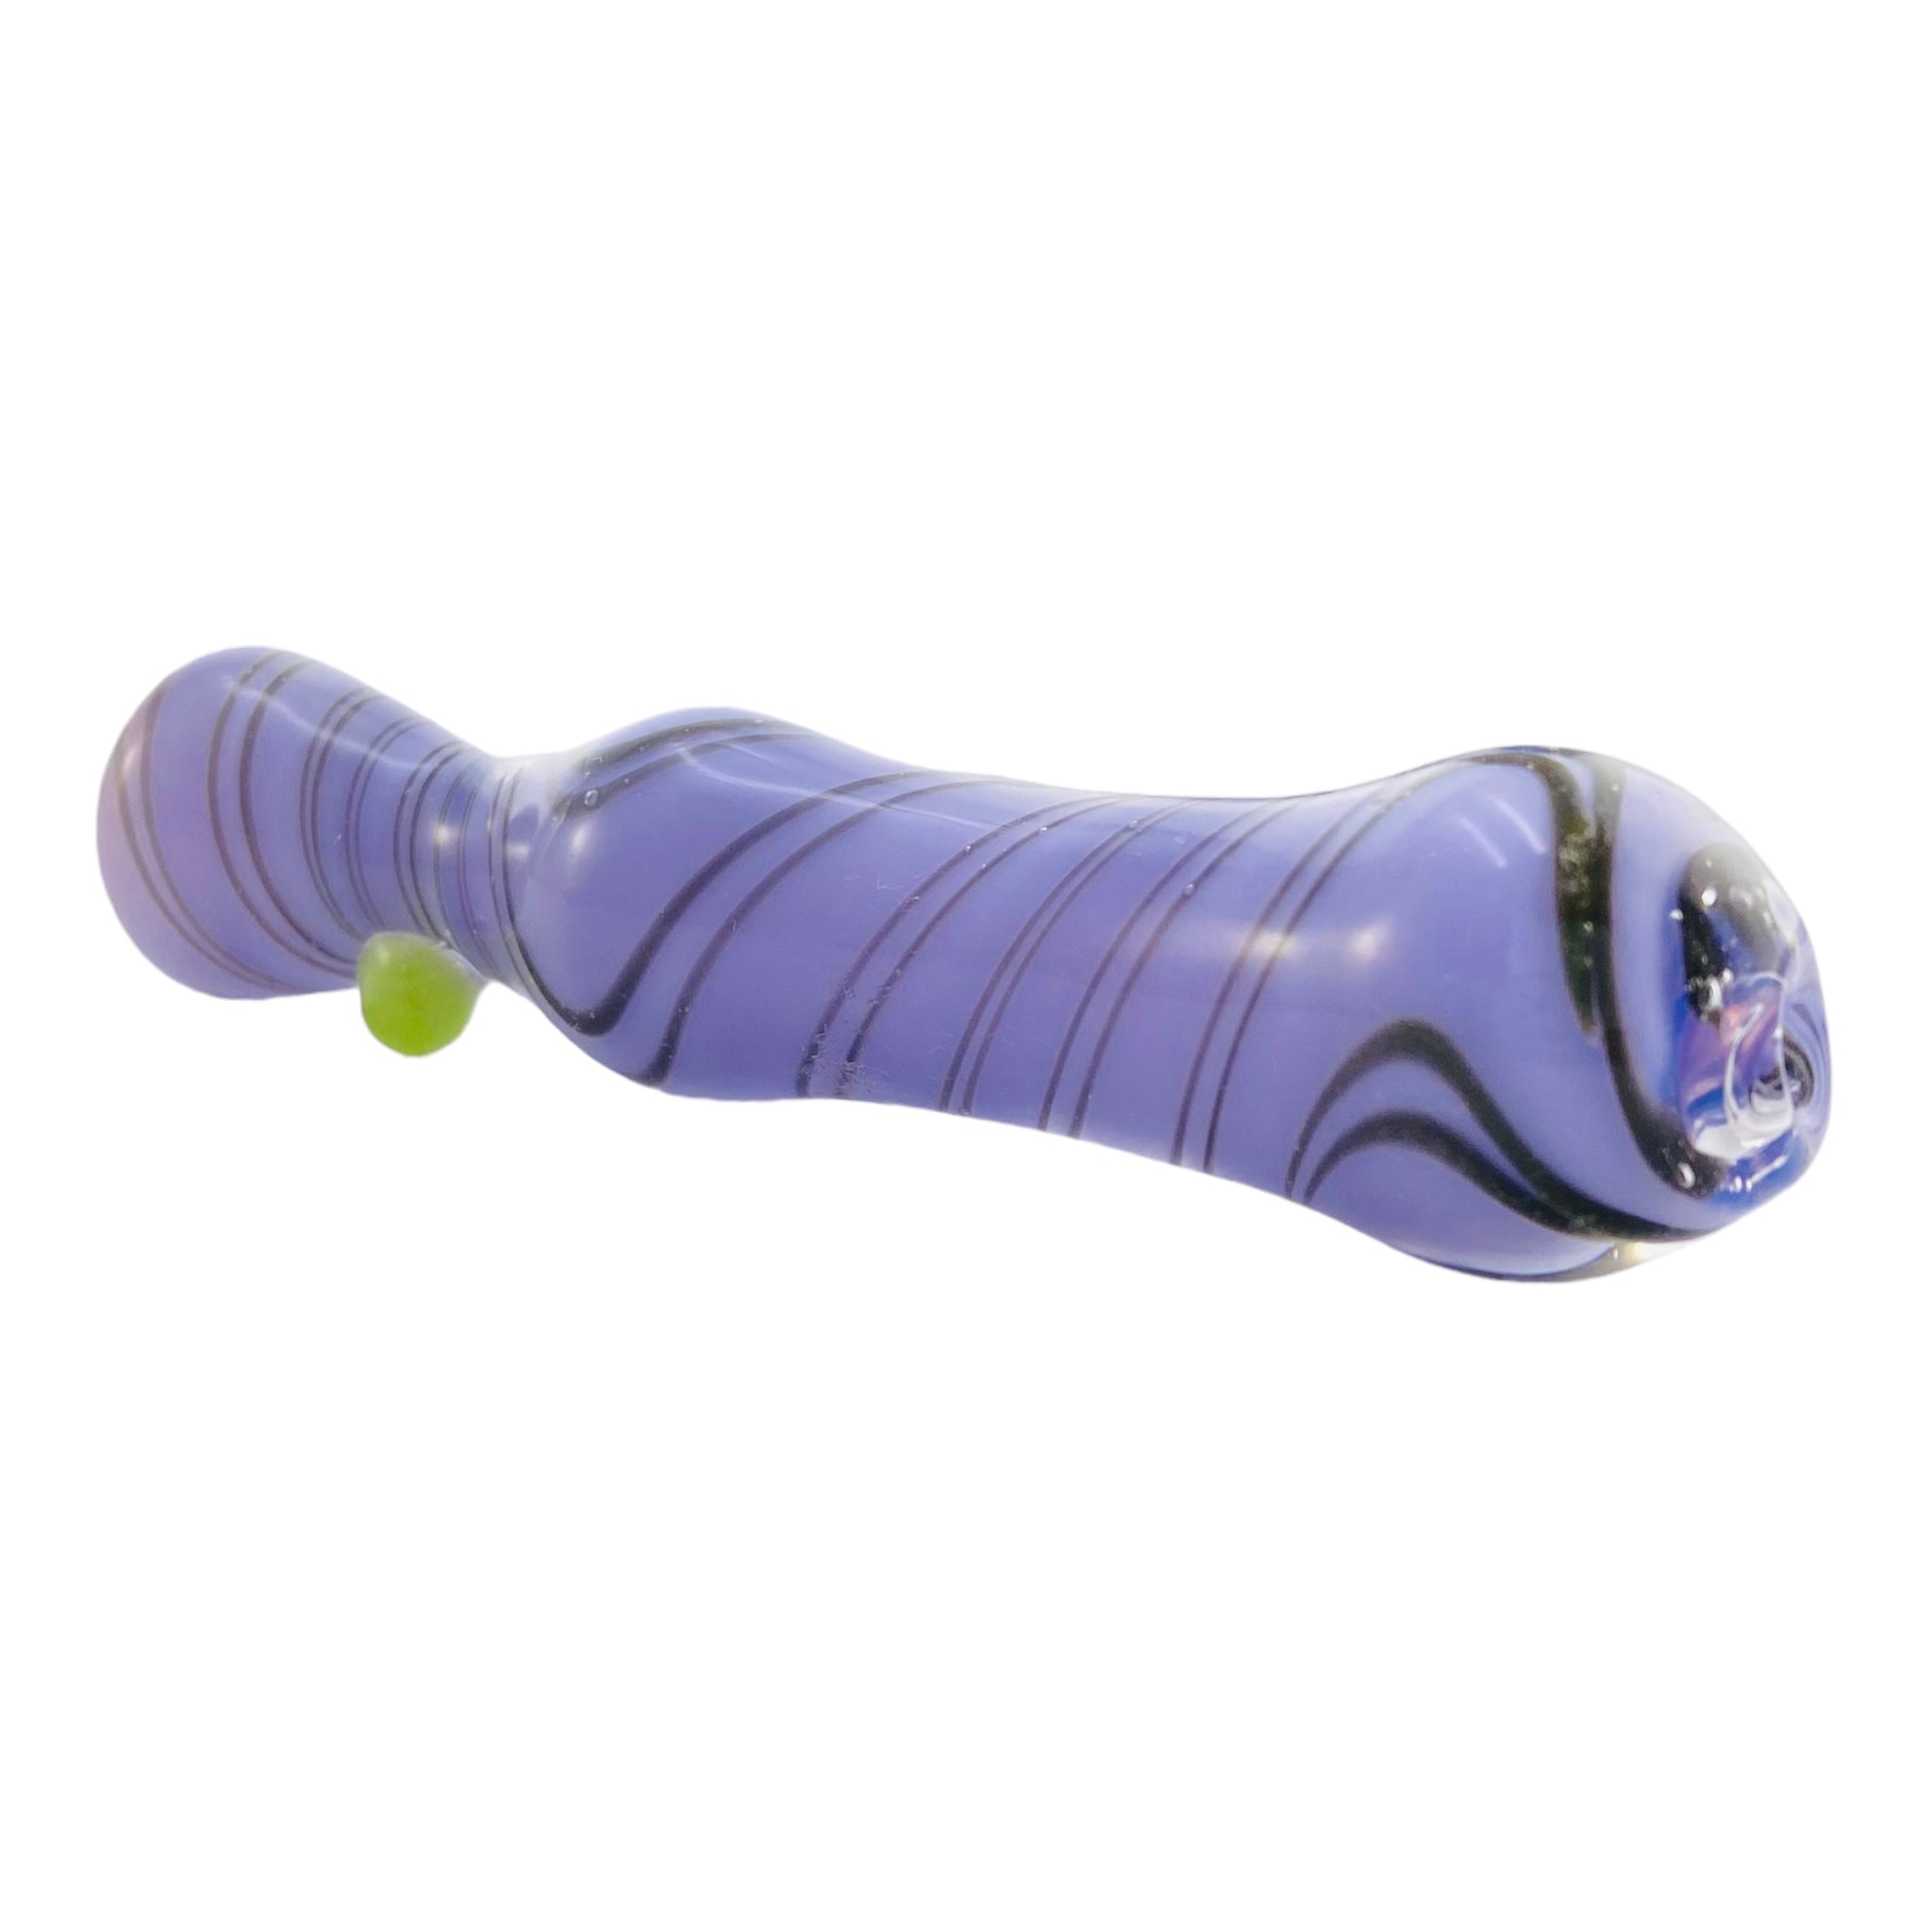 Glass Chillum Pipe - Purple With Black Spirals And Green Dot